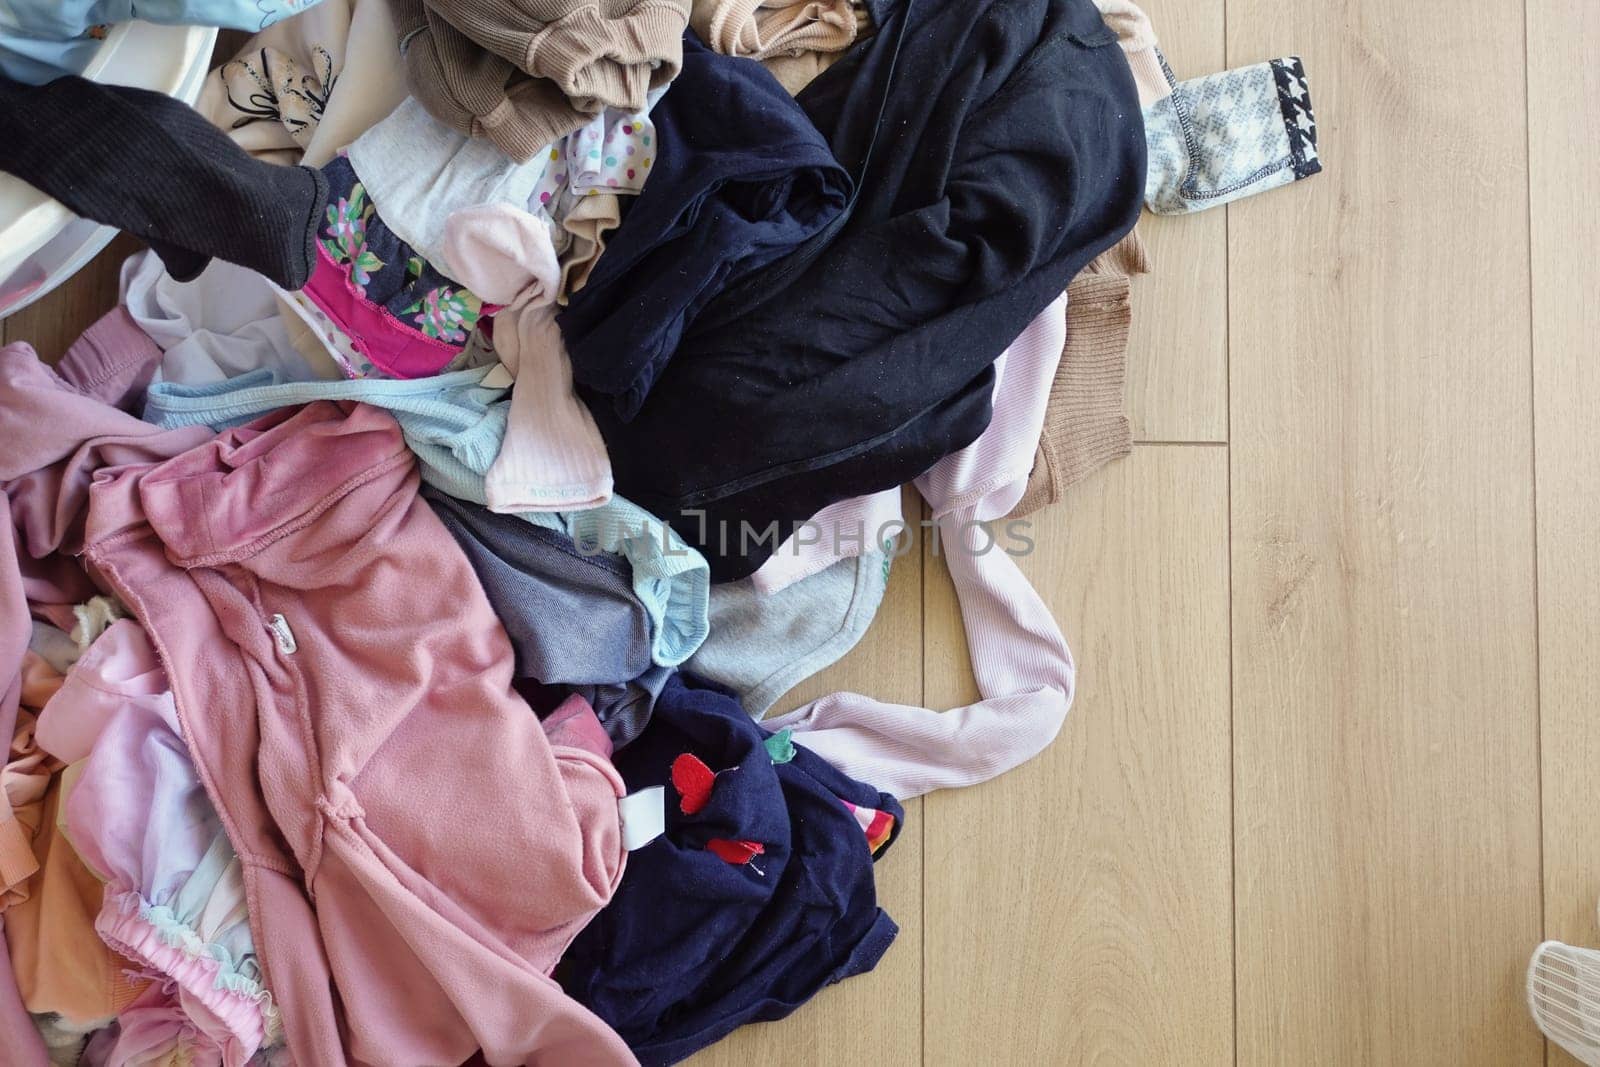 Clothes pile next to laundry basket filled with garments, on hardwood floor by towfiq007